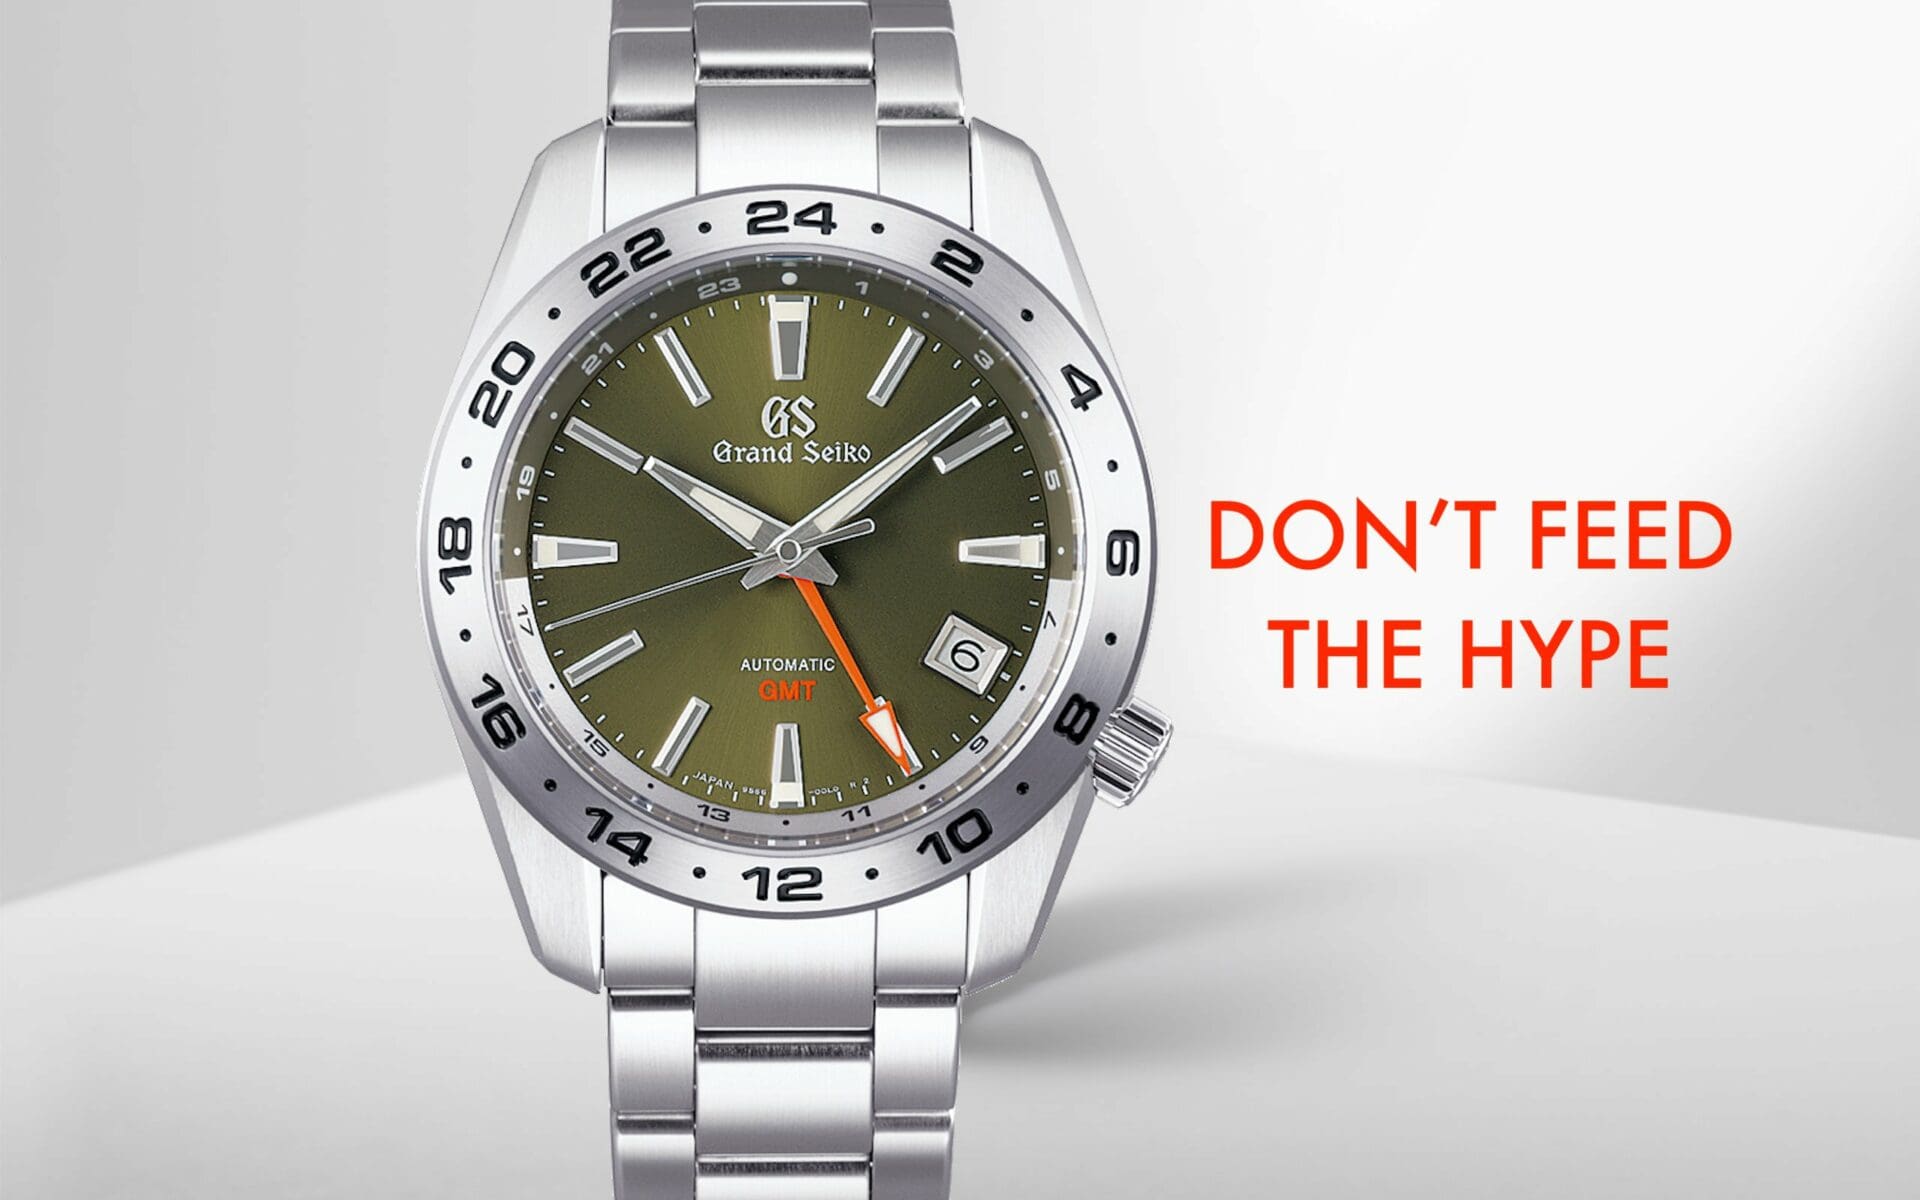 DON’T FEED THE HYPE: 3 alternatives to the Rolex Explorer II ref. 226570